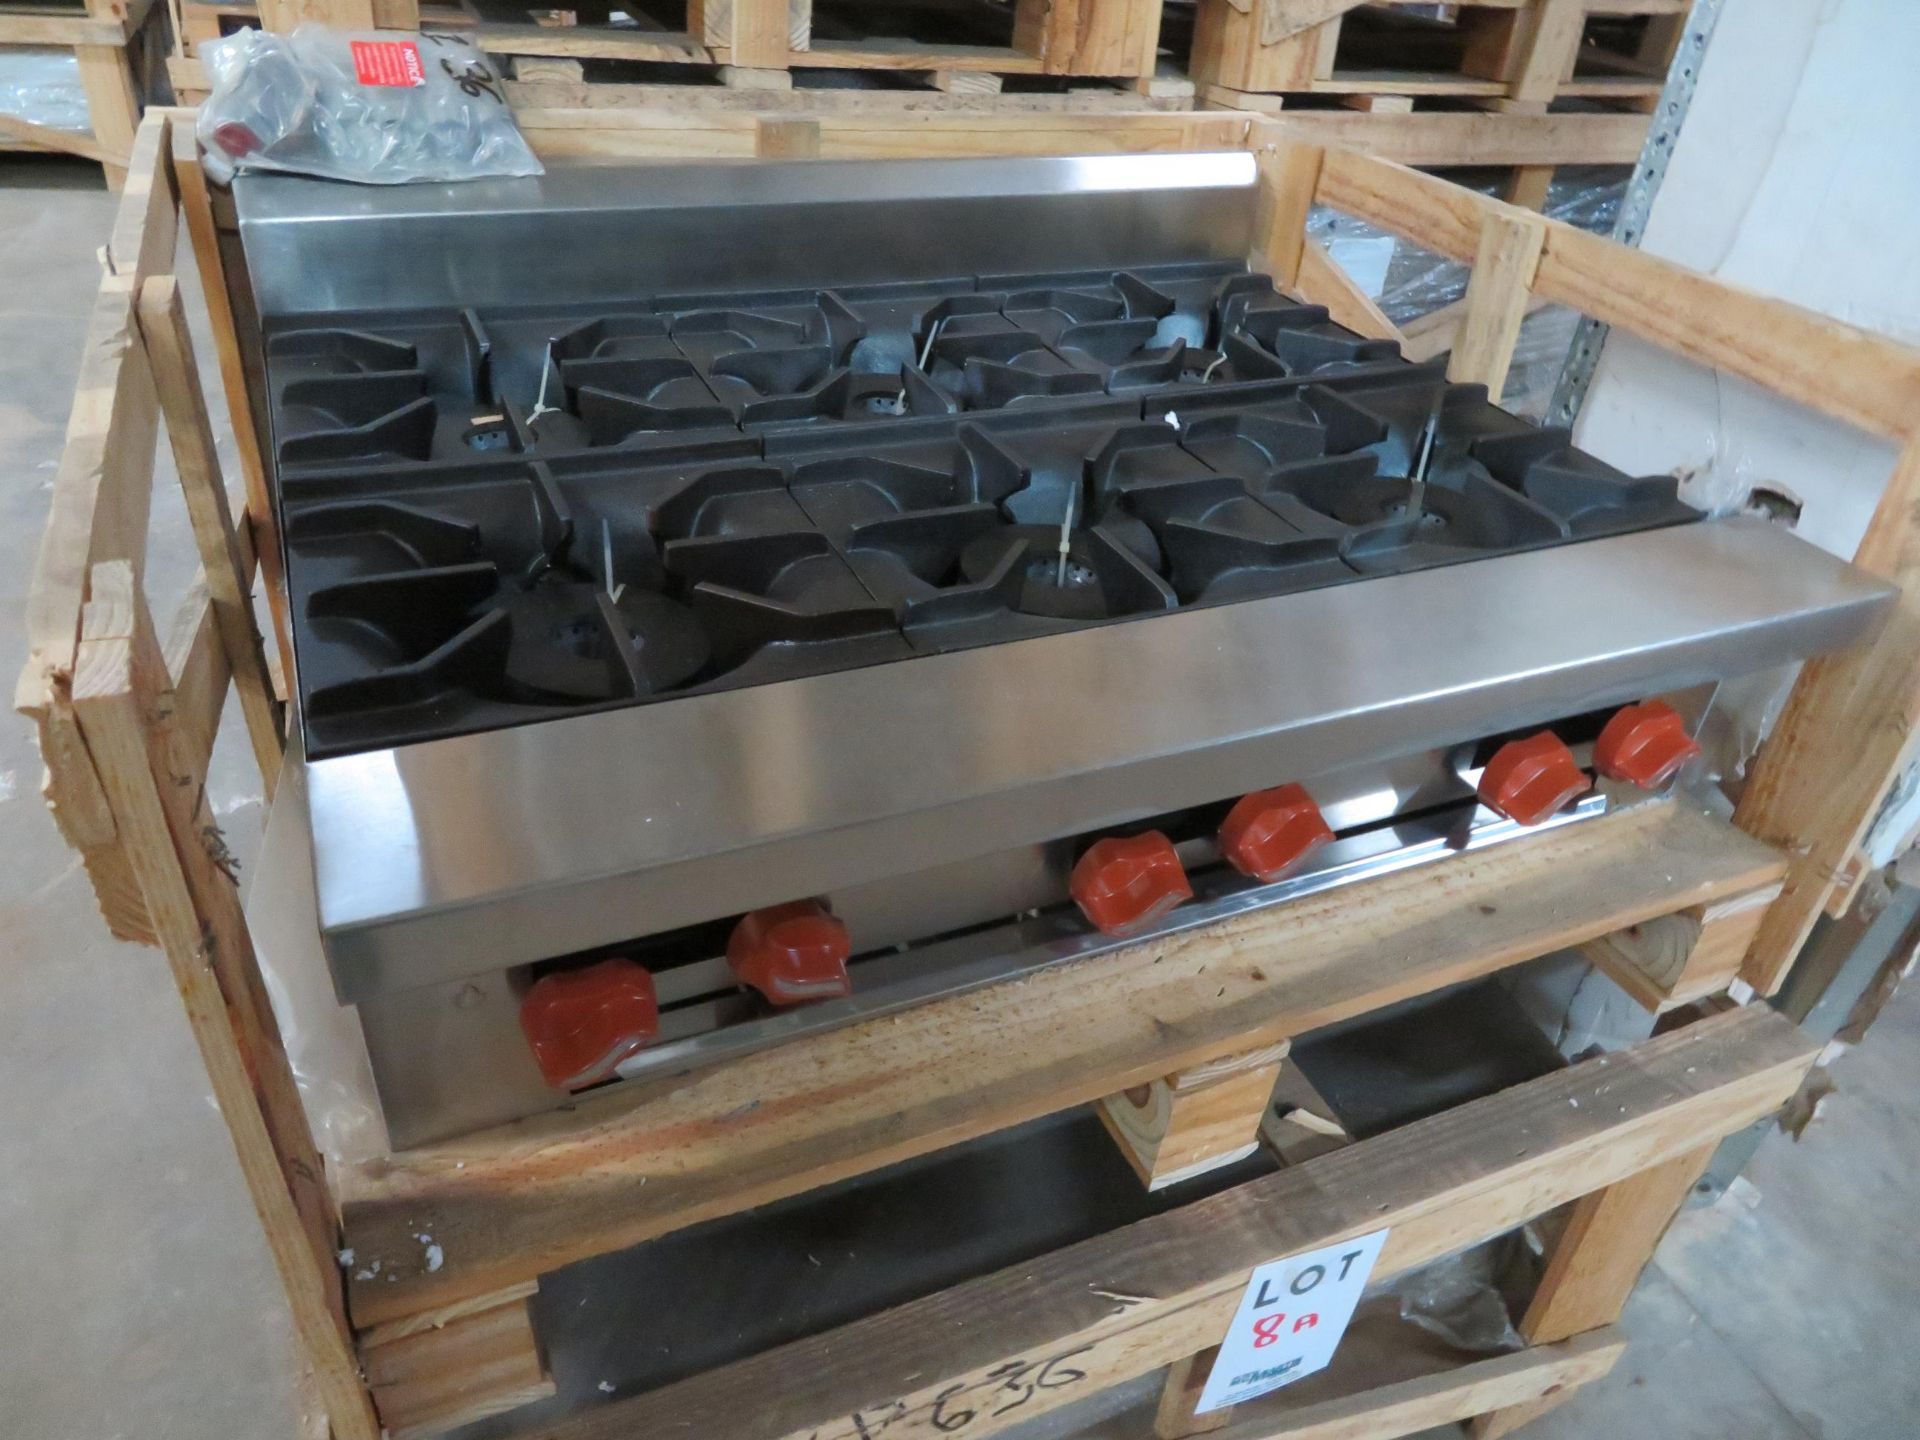 Brand New SIERRA gas 36"hot plate with 6 burners, Mod #SR-HP-6-36, approx. 36"w x 30"d x 9"h - Image 2 of 2